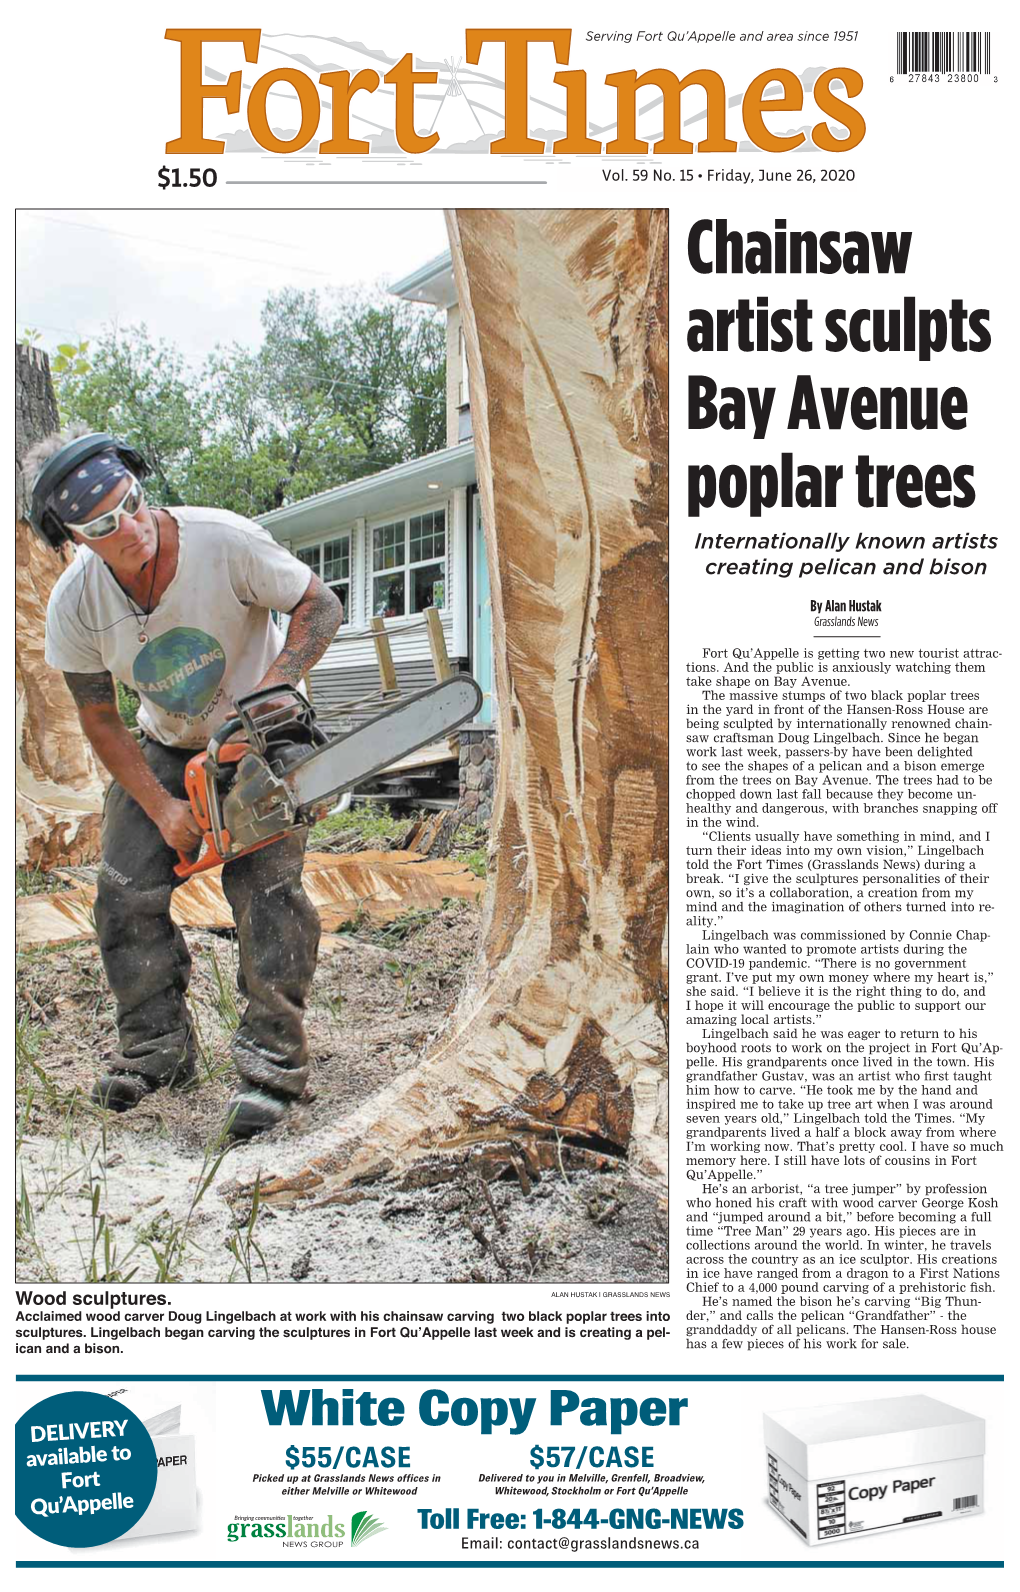 Chainsaw Artist Sculpts Bay Avenue Poplar Trees Internationally Known Artists Creating Pelican and Bison